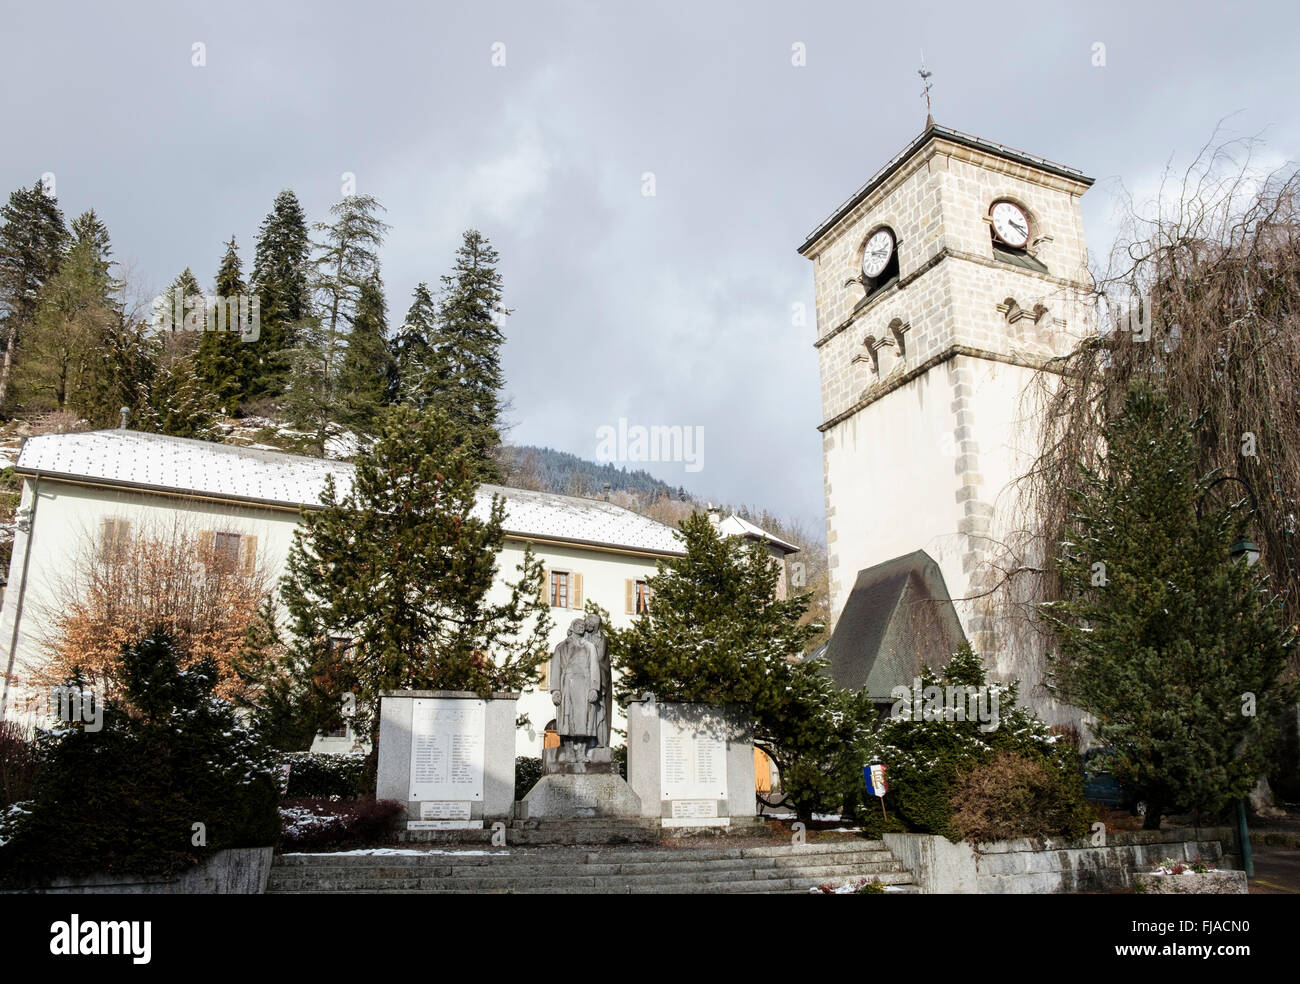 War memorial outside the Church of Our Lady of the Assumption in traditional alpine village of Samoens Rhone-Alpes France Stock Photo